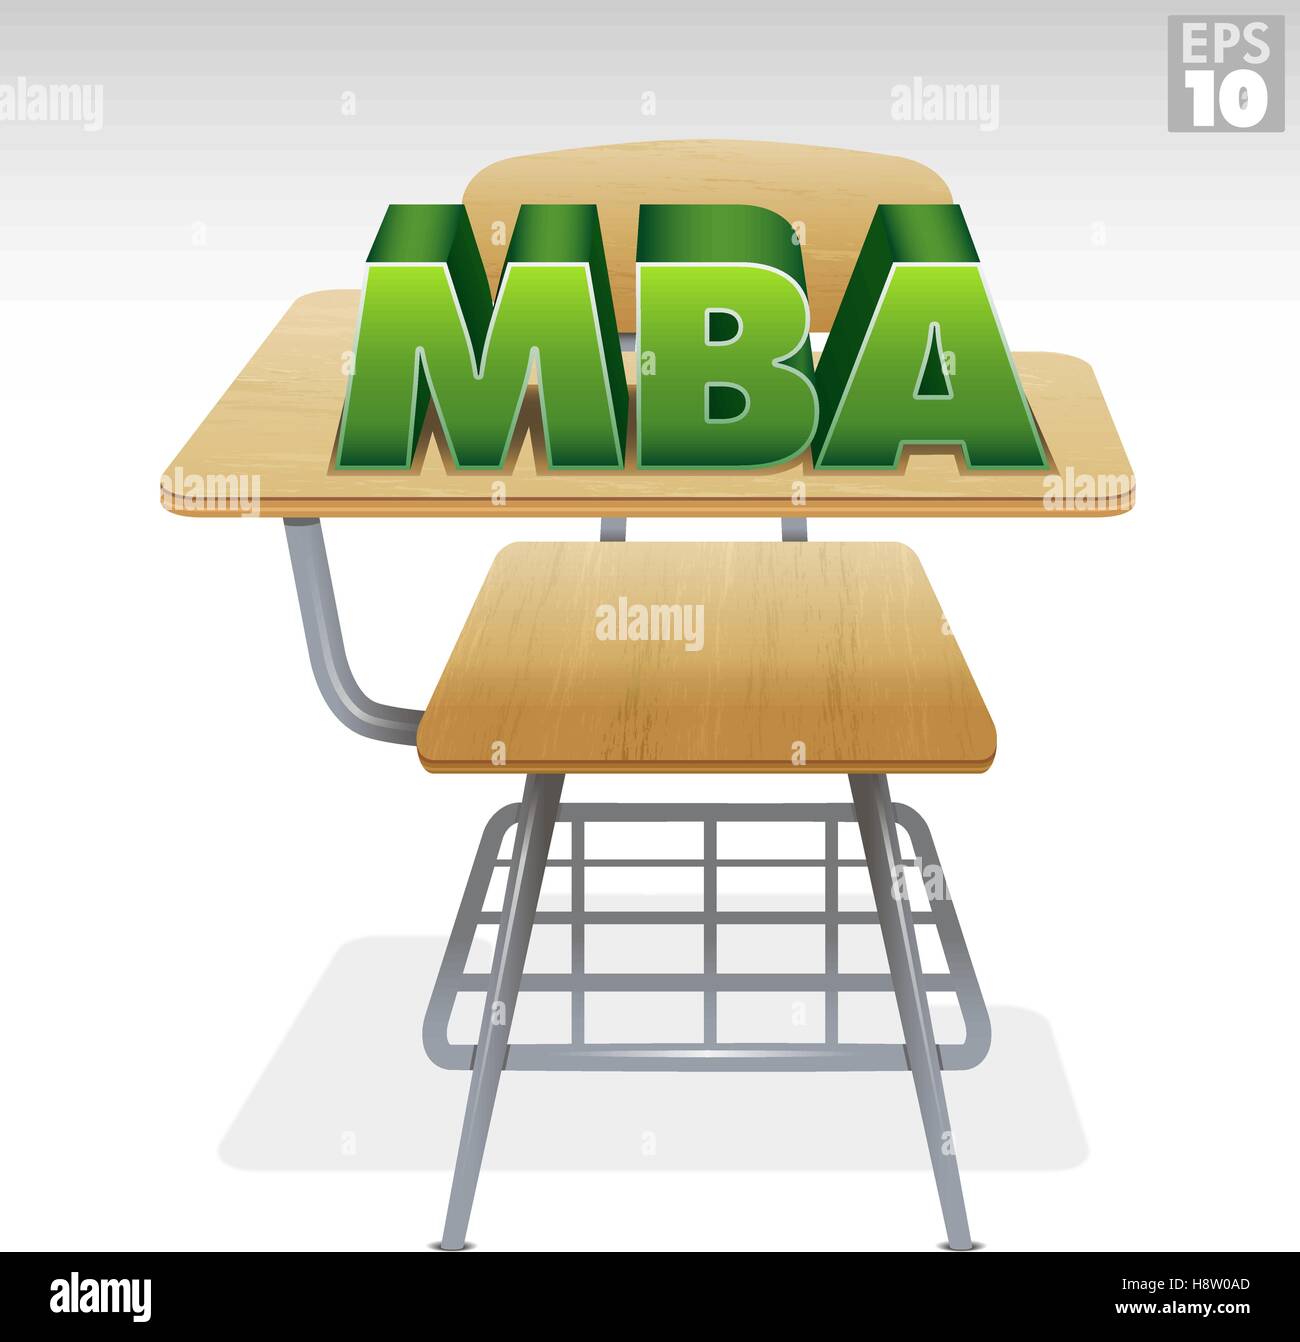 MBA student classes, a wooden school desk with MBA text Stock Vector